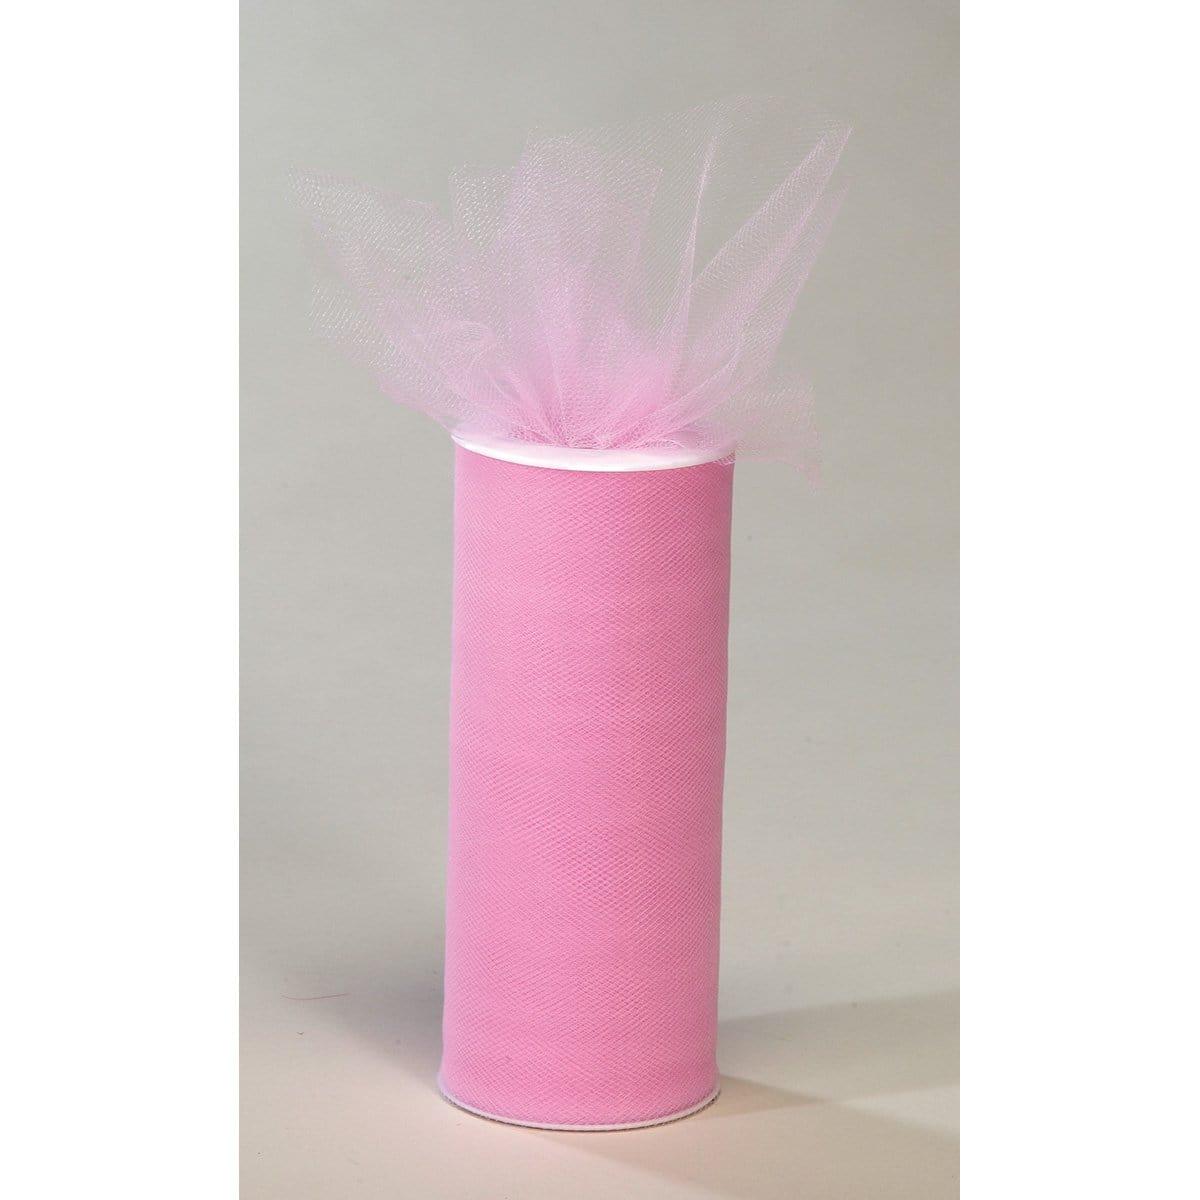 Buy Decorations Tulle Roll - Pink 6 in. x 25 yds sold at Party Expert